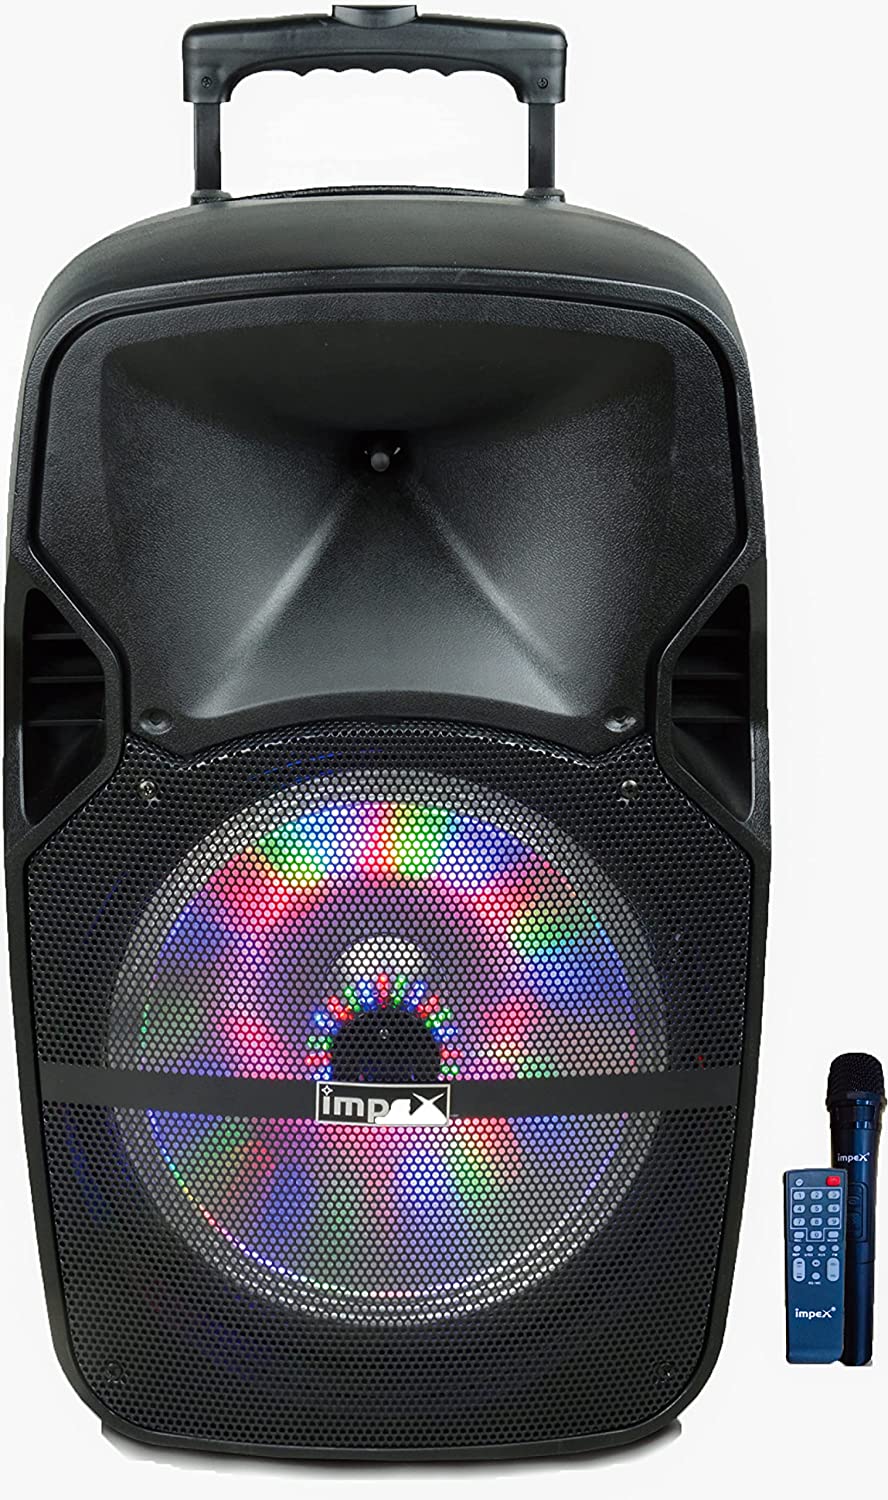 Impex ST 80A 55W Rechargeable 2.0 Multimedia Trolley Speaker System with Wireless Connectivity USB/SD/FM Function Wireless Mic LED Light